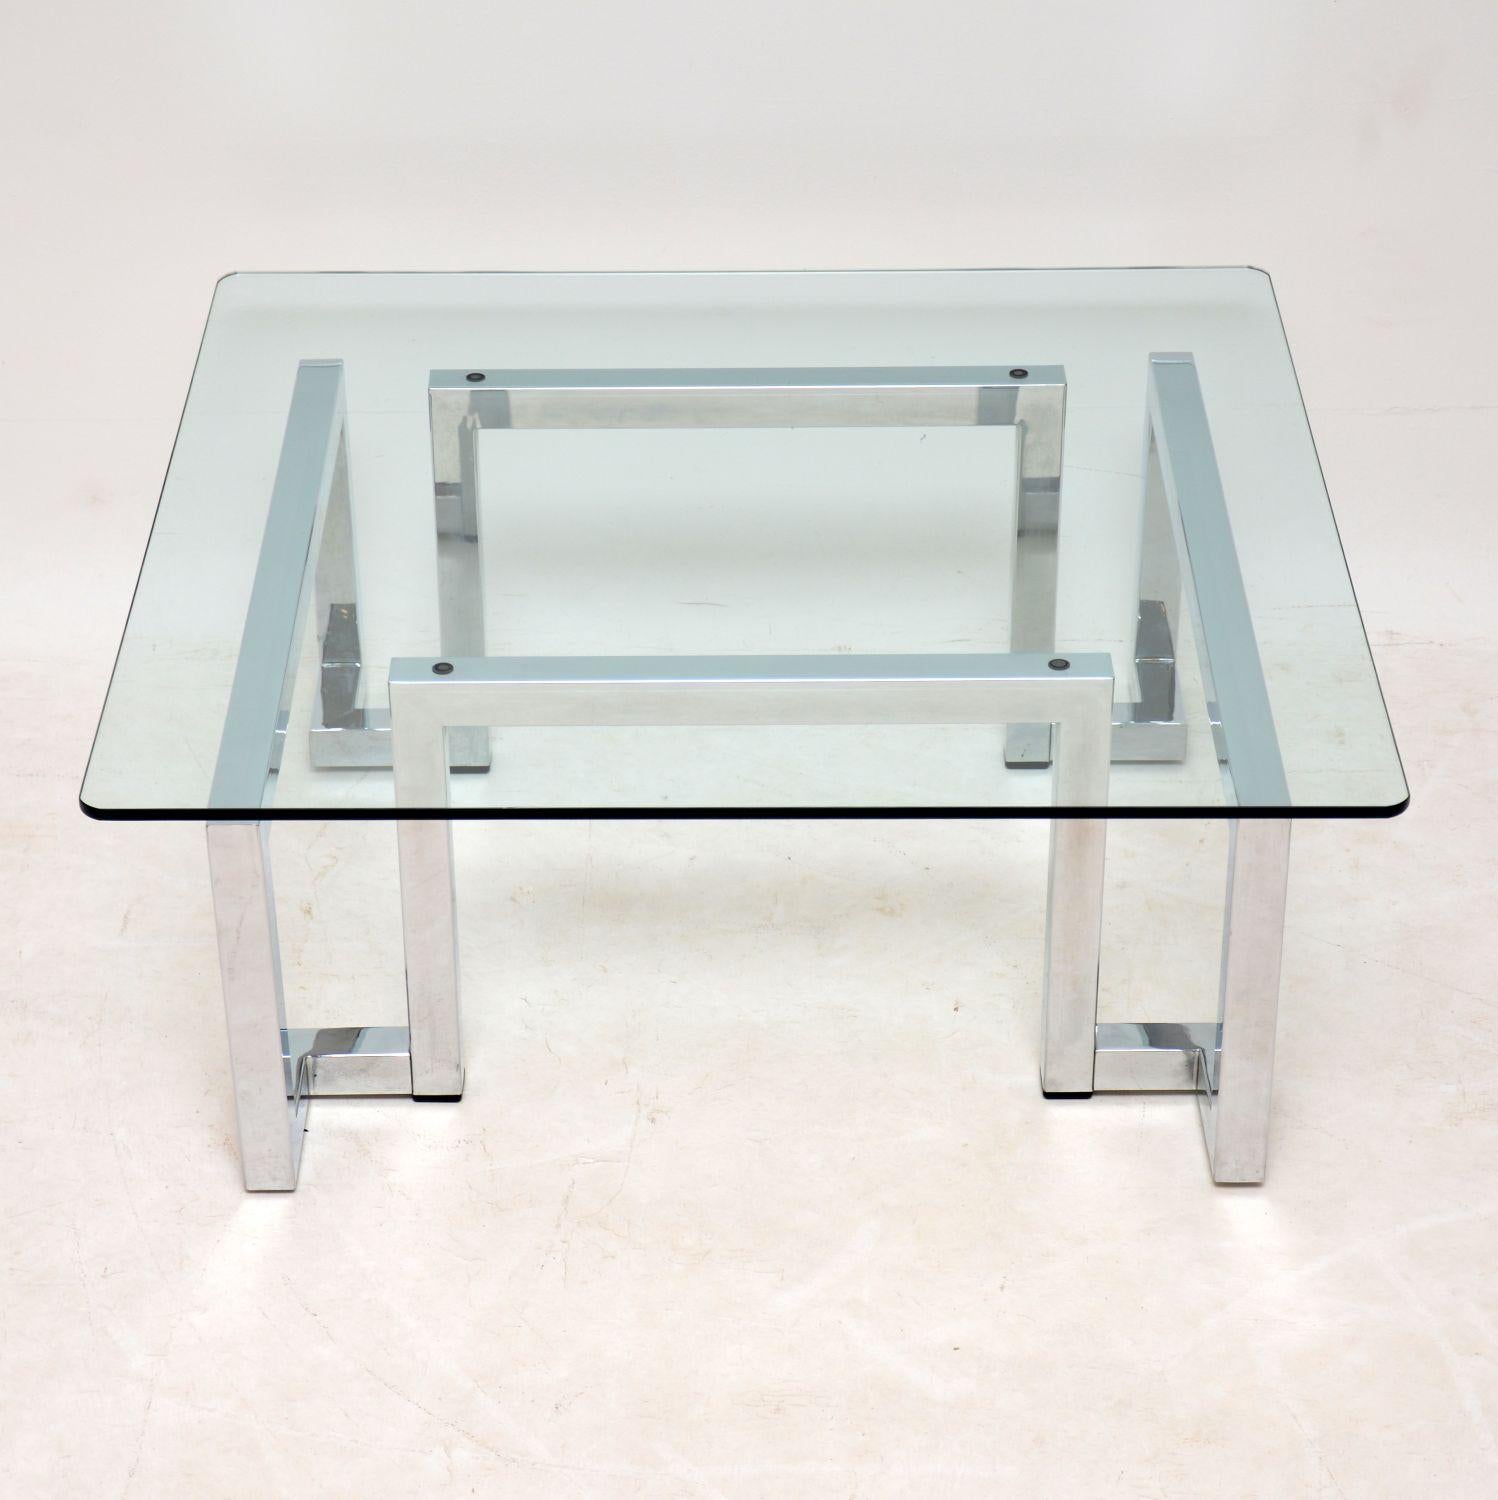 A stylish and very well made vintage coffee table, this was designed by Tim Bates and made by Pieff in the 1970s. It has a beautiful angular chrome frame, and thick toughened glass square top with rounded corners. It is in superb condition for its